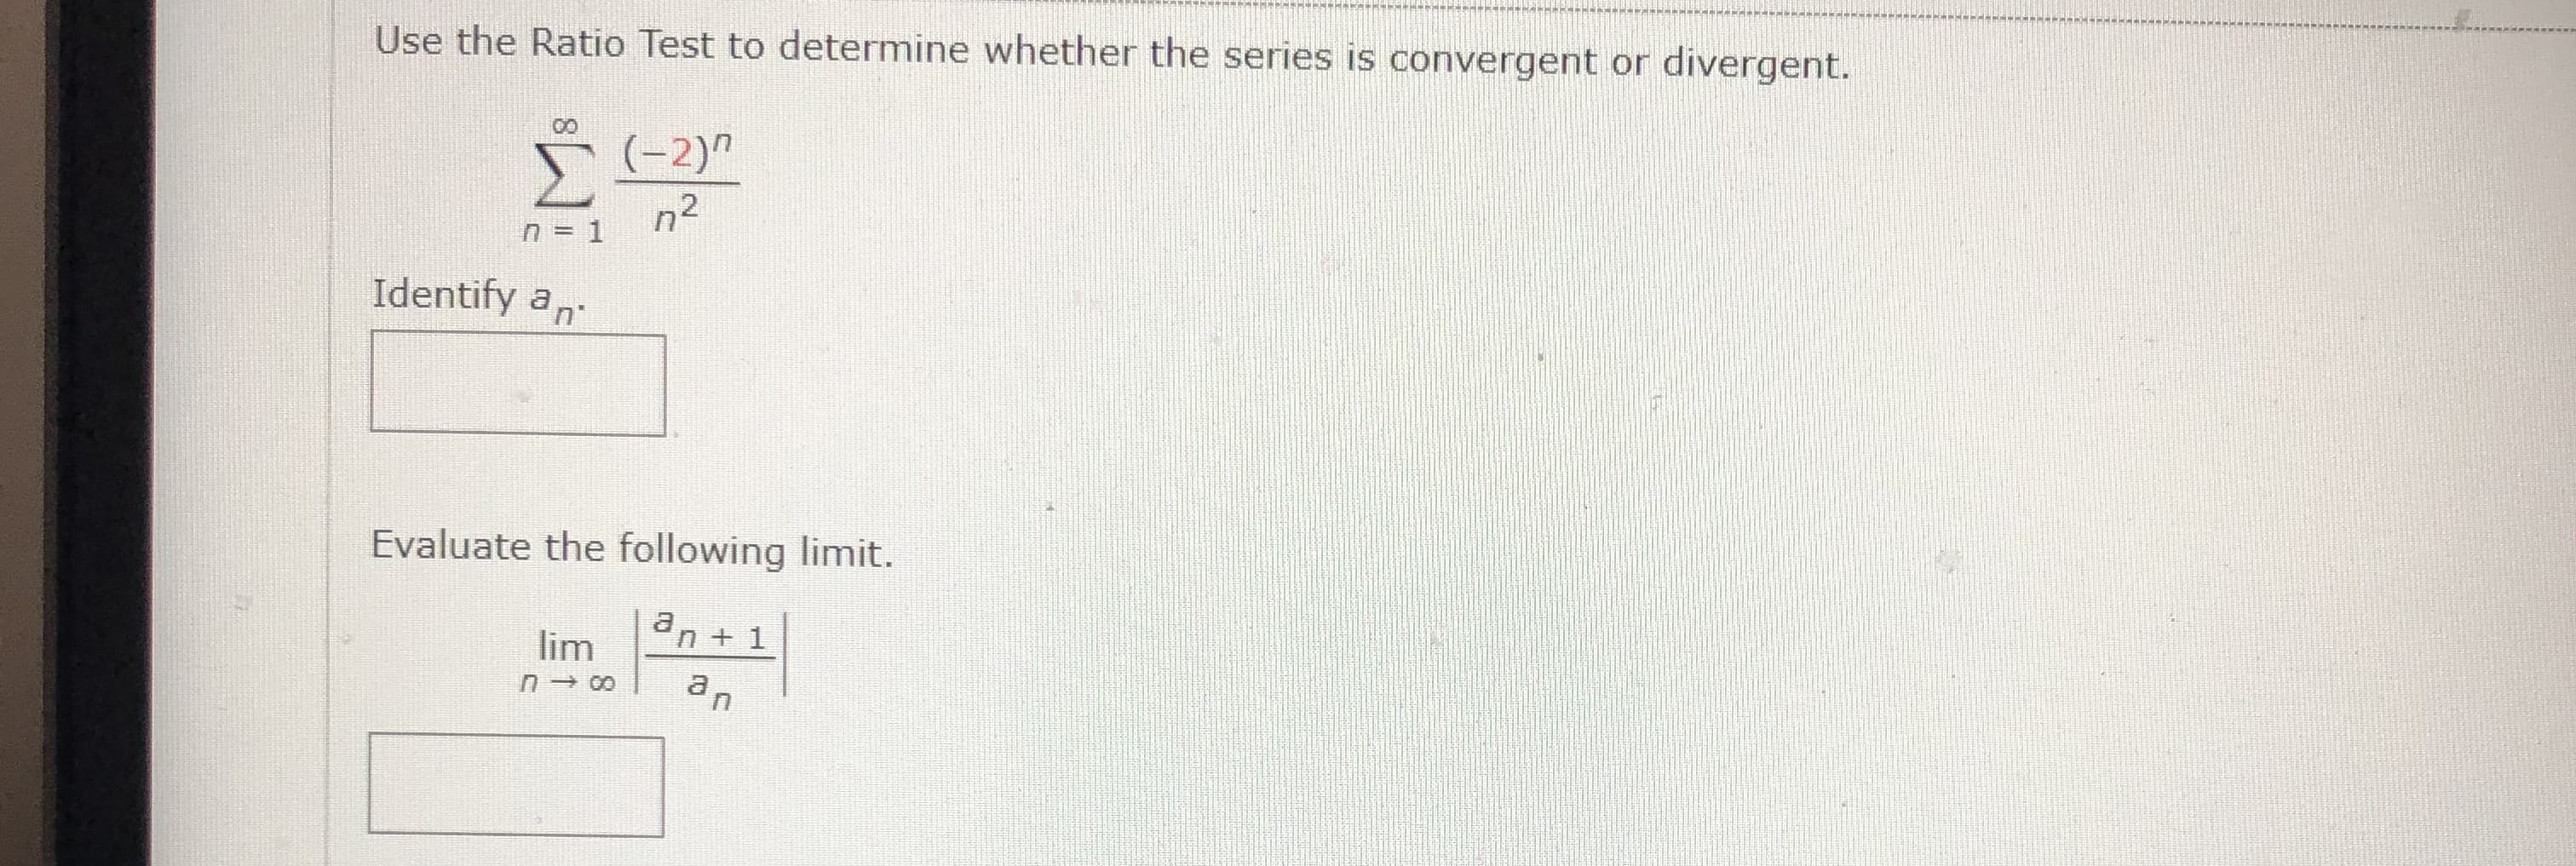 Use the Ratio Test to determine whether the series is convergent or divergent.
00
(-2)"
Σ
n2
n = 1
Identify an
Evaluate the following limit.
an + 1
lim
an
